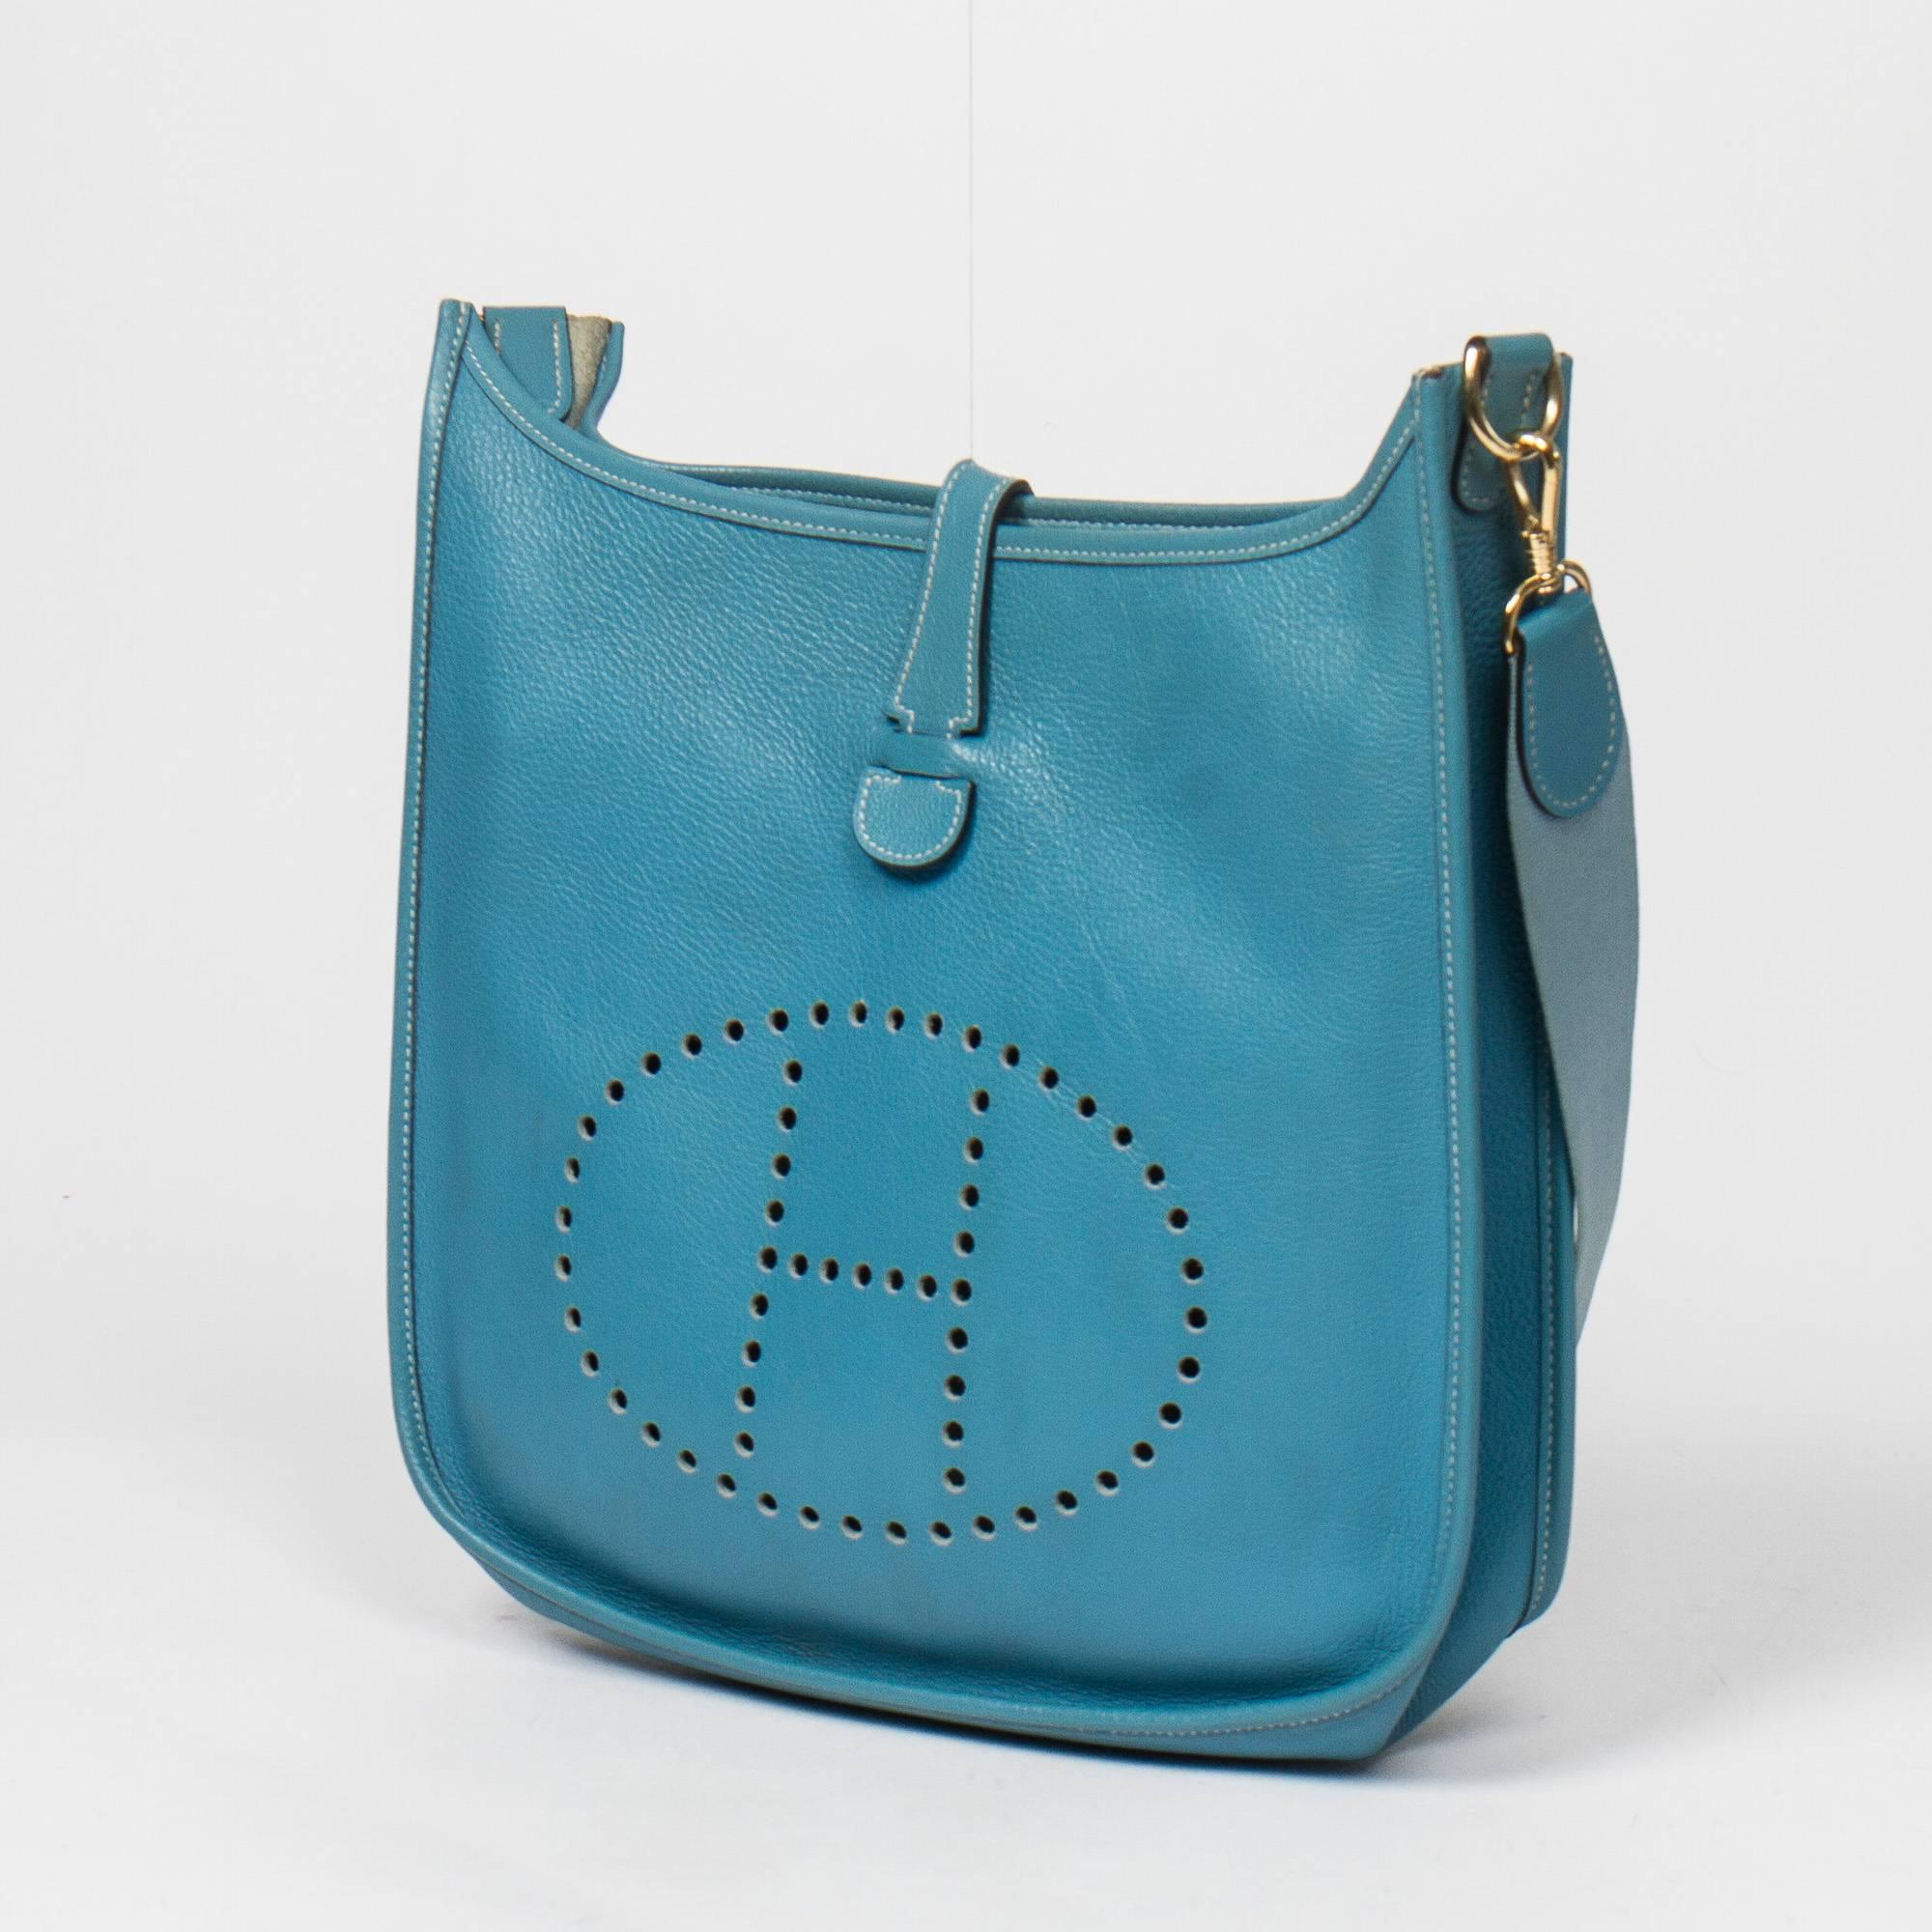 Hermès Evelyne GM in blue Jean Taurillon leather and gold tone hardware. Stamp C in a square. Model from 1999. Very slight marks on the leather of the bag, some scratches on the hardware. Dustbag included. Excellent condition overall.
